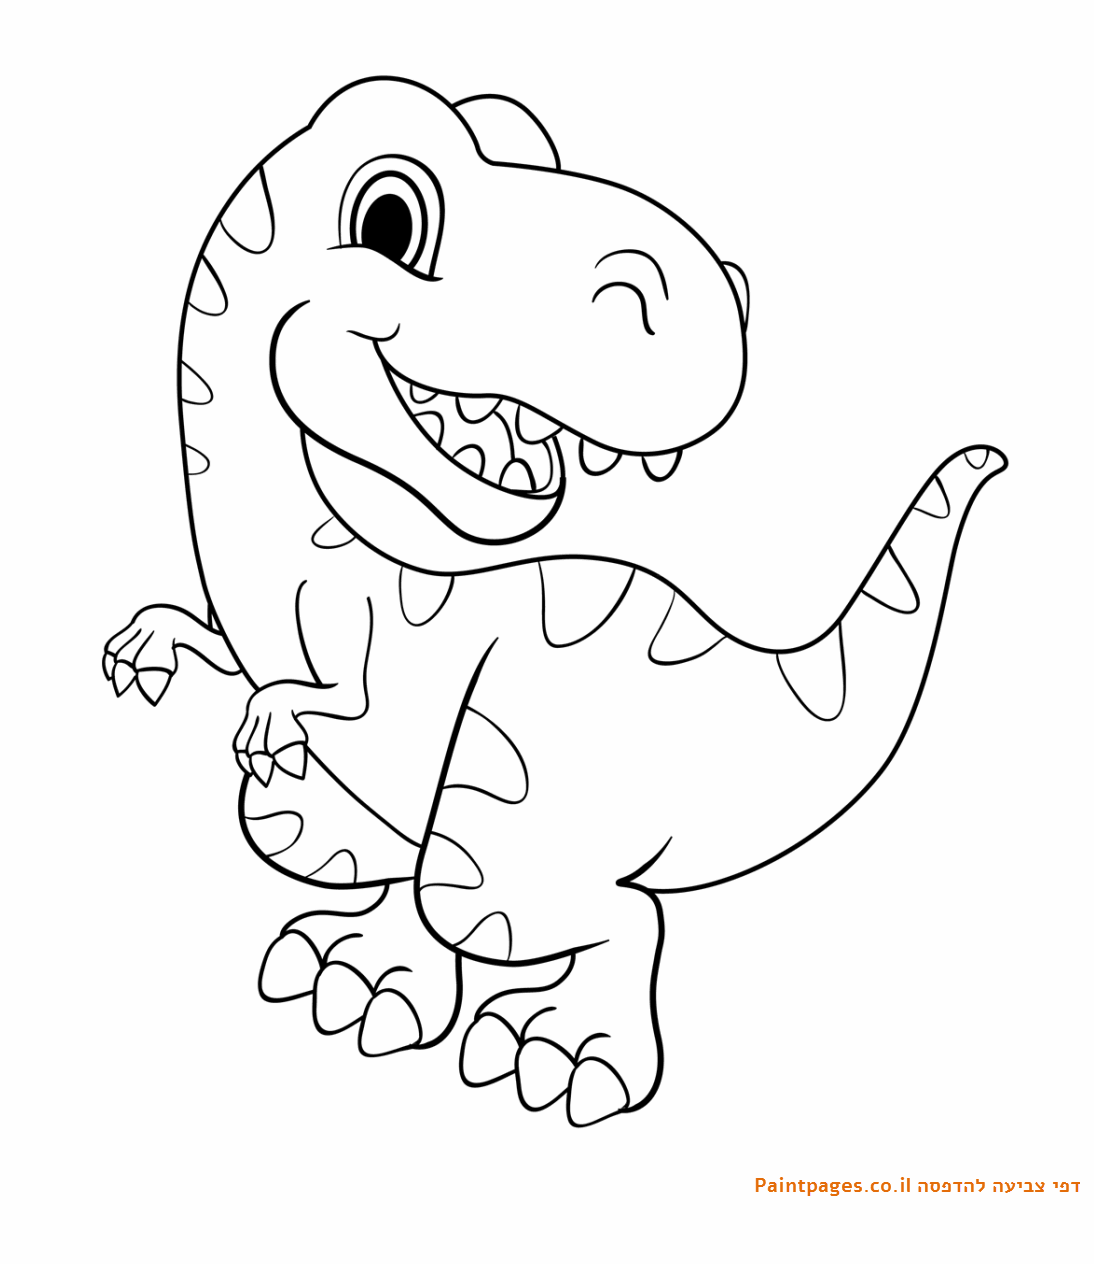 dino coloring page dinosaur colouring pages in the playroom coloring dino page 